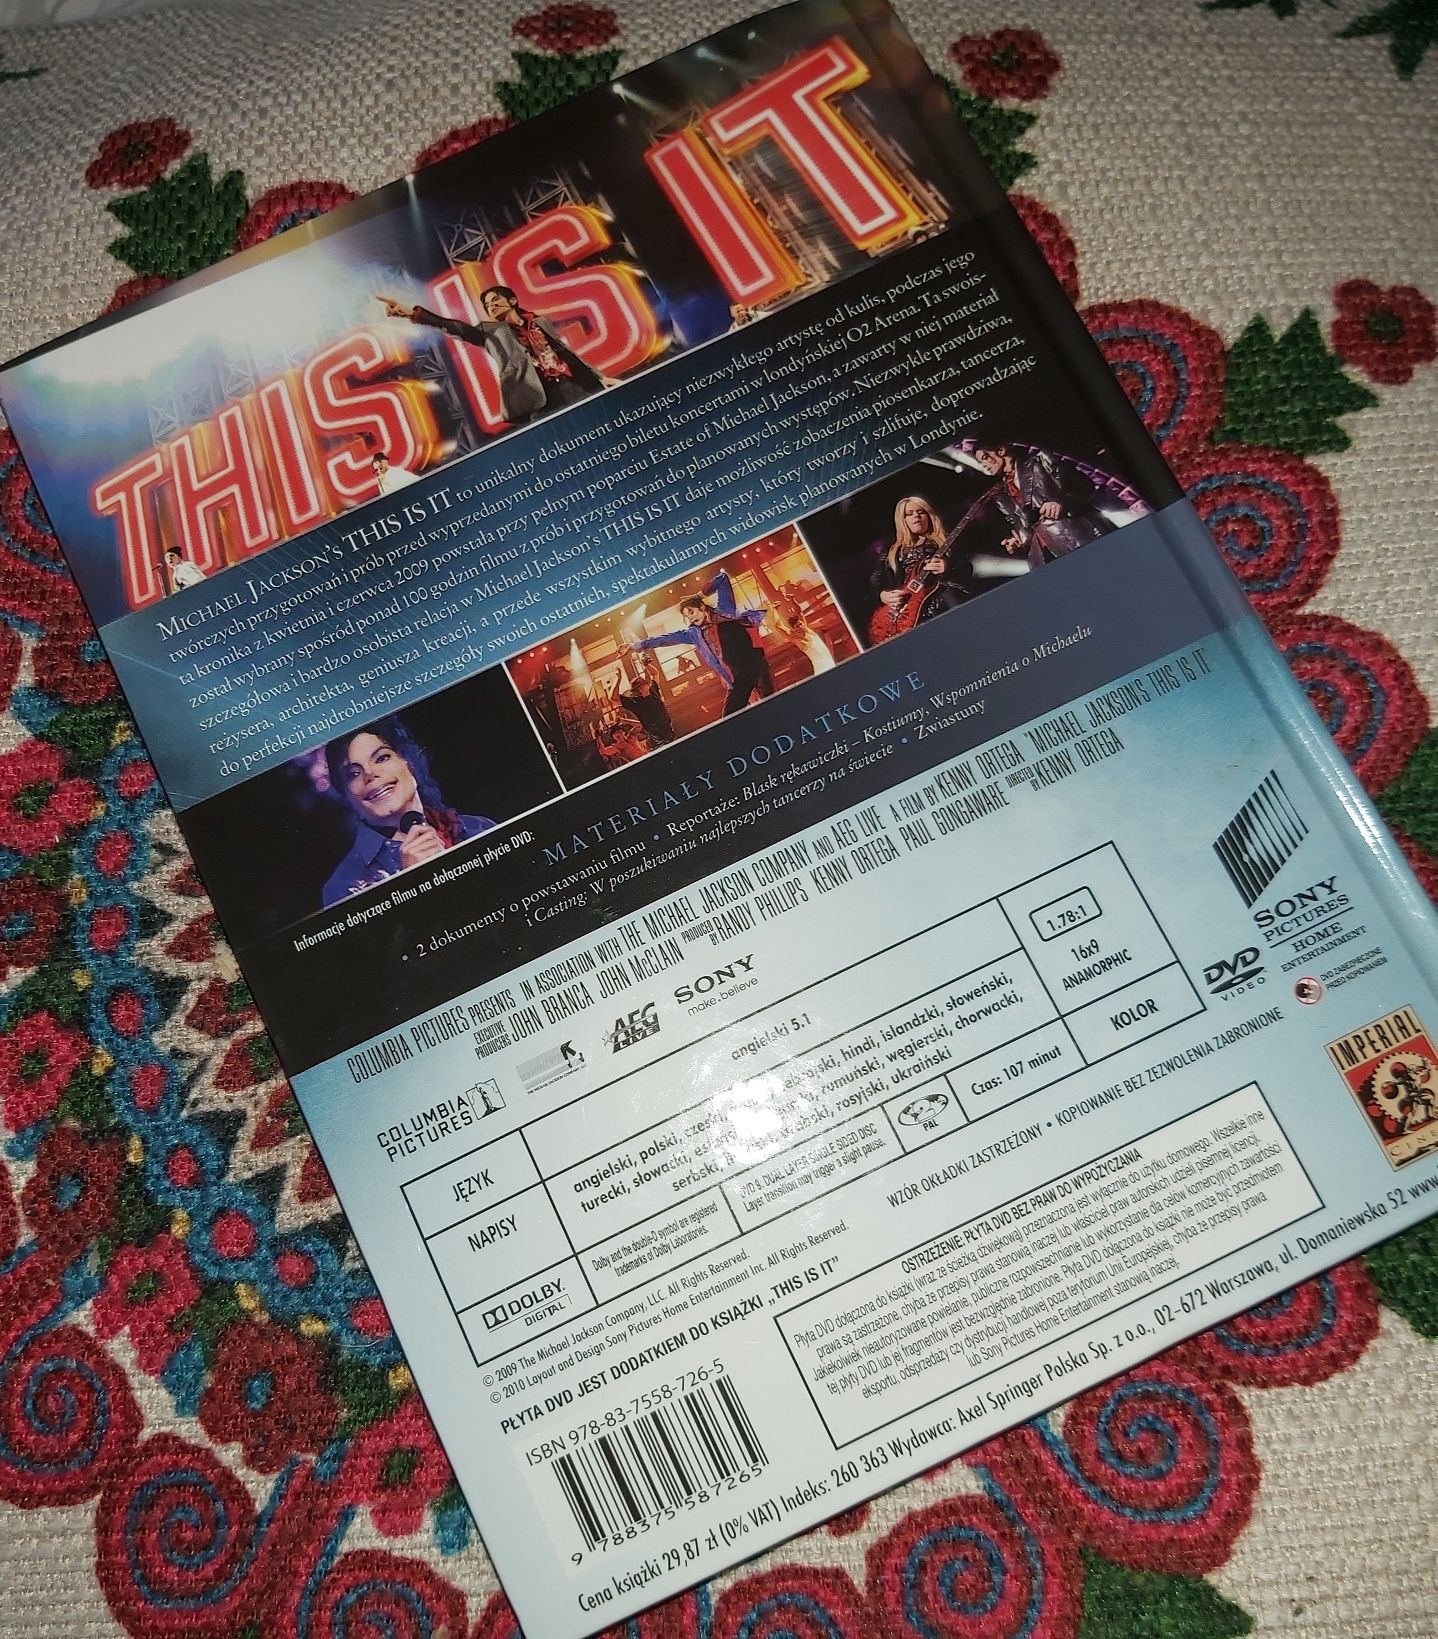 Michael Jackson's This is it DVD